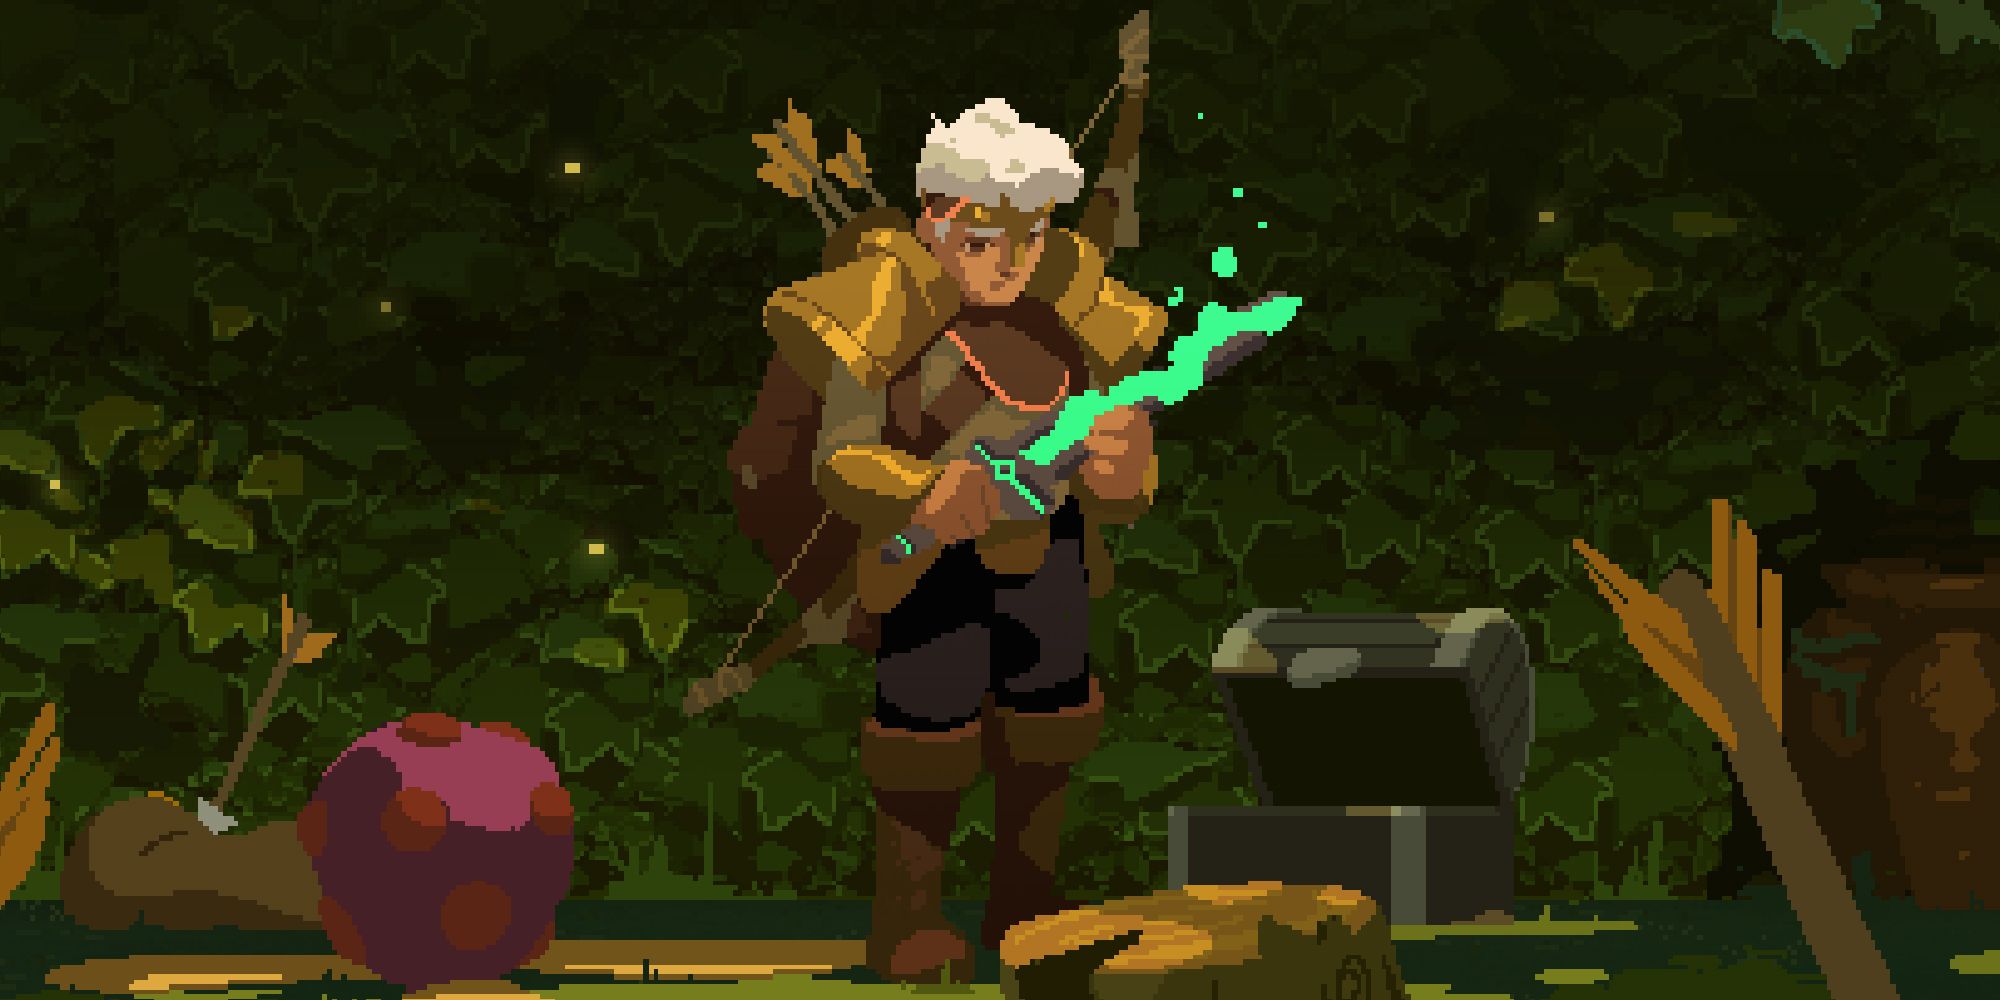 Moonlighter - Will In Full Armor Looking At A Weapon In The Forest Dungeon